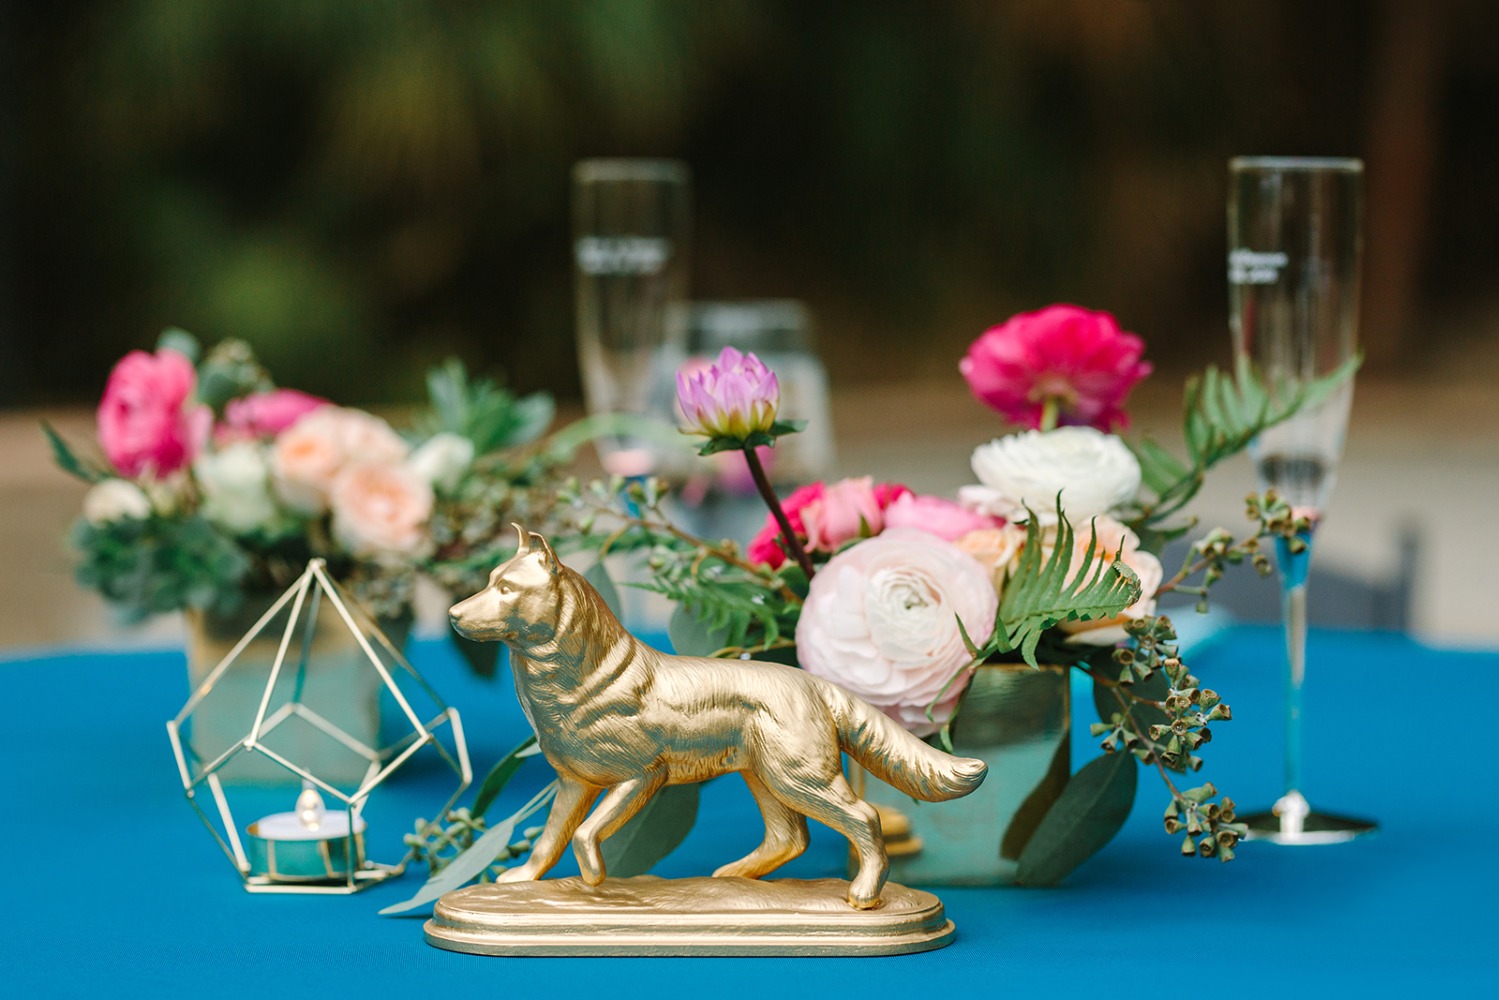 Turquoise and gold table decor